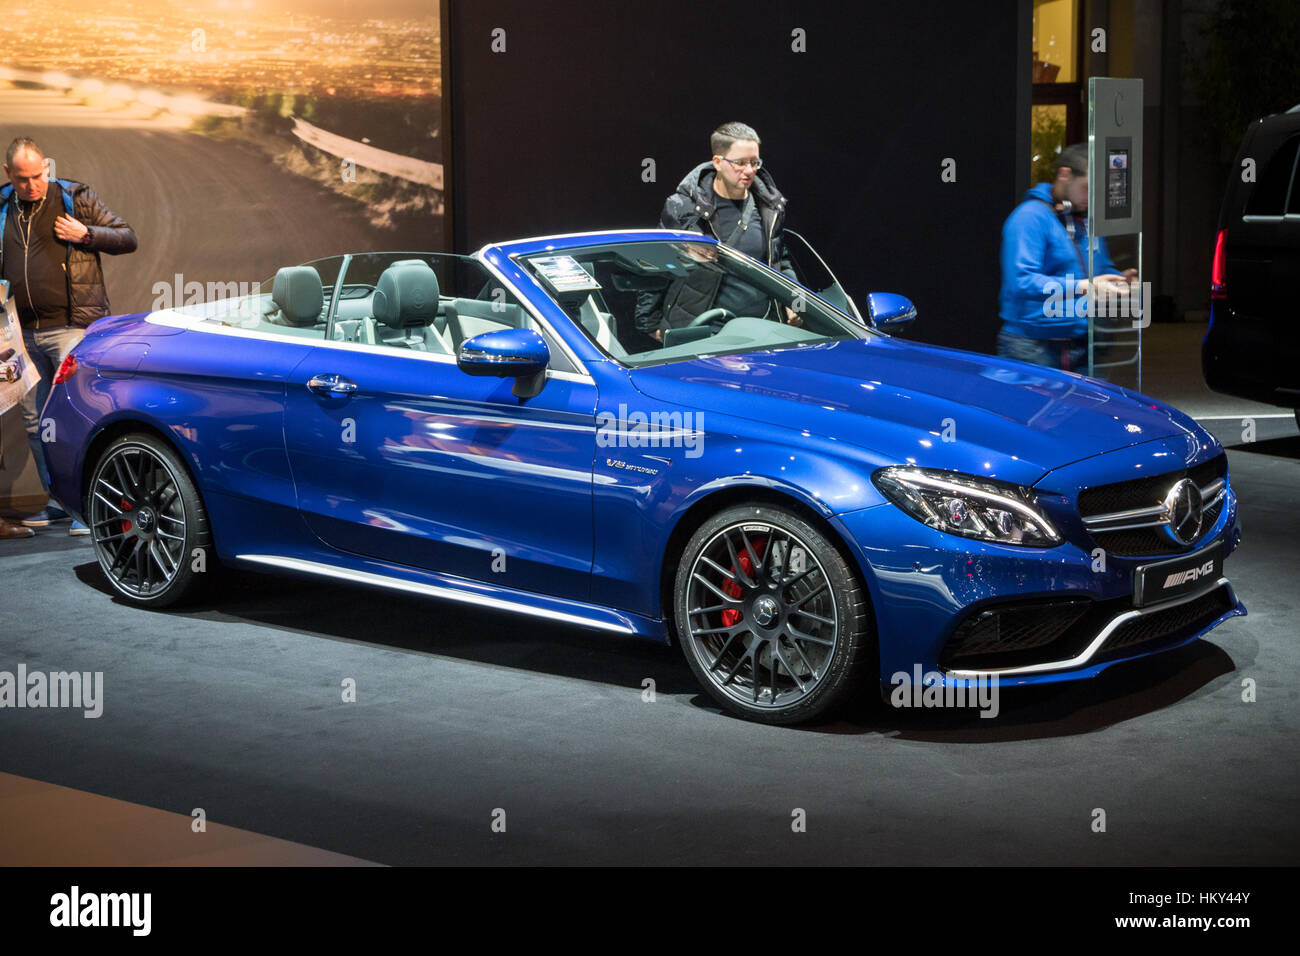 BRUSSELS - JAN 19, 2017: Mercedes-AMG SL65 on display at the Motor Show Brussels. Stock Photo